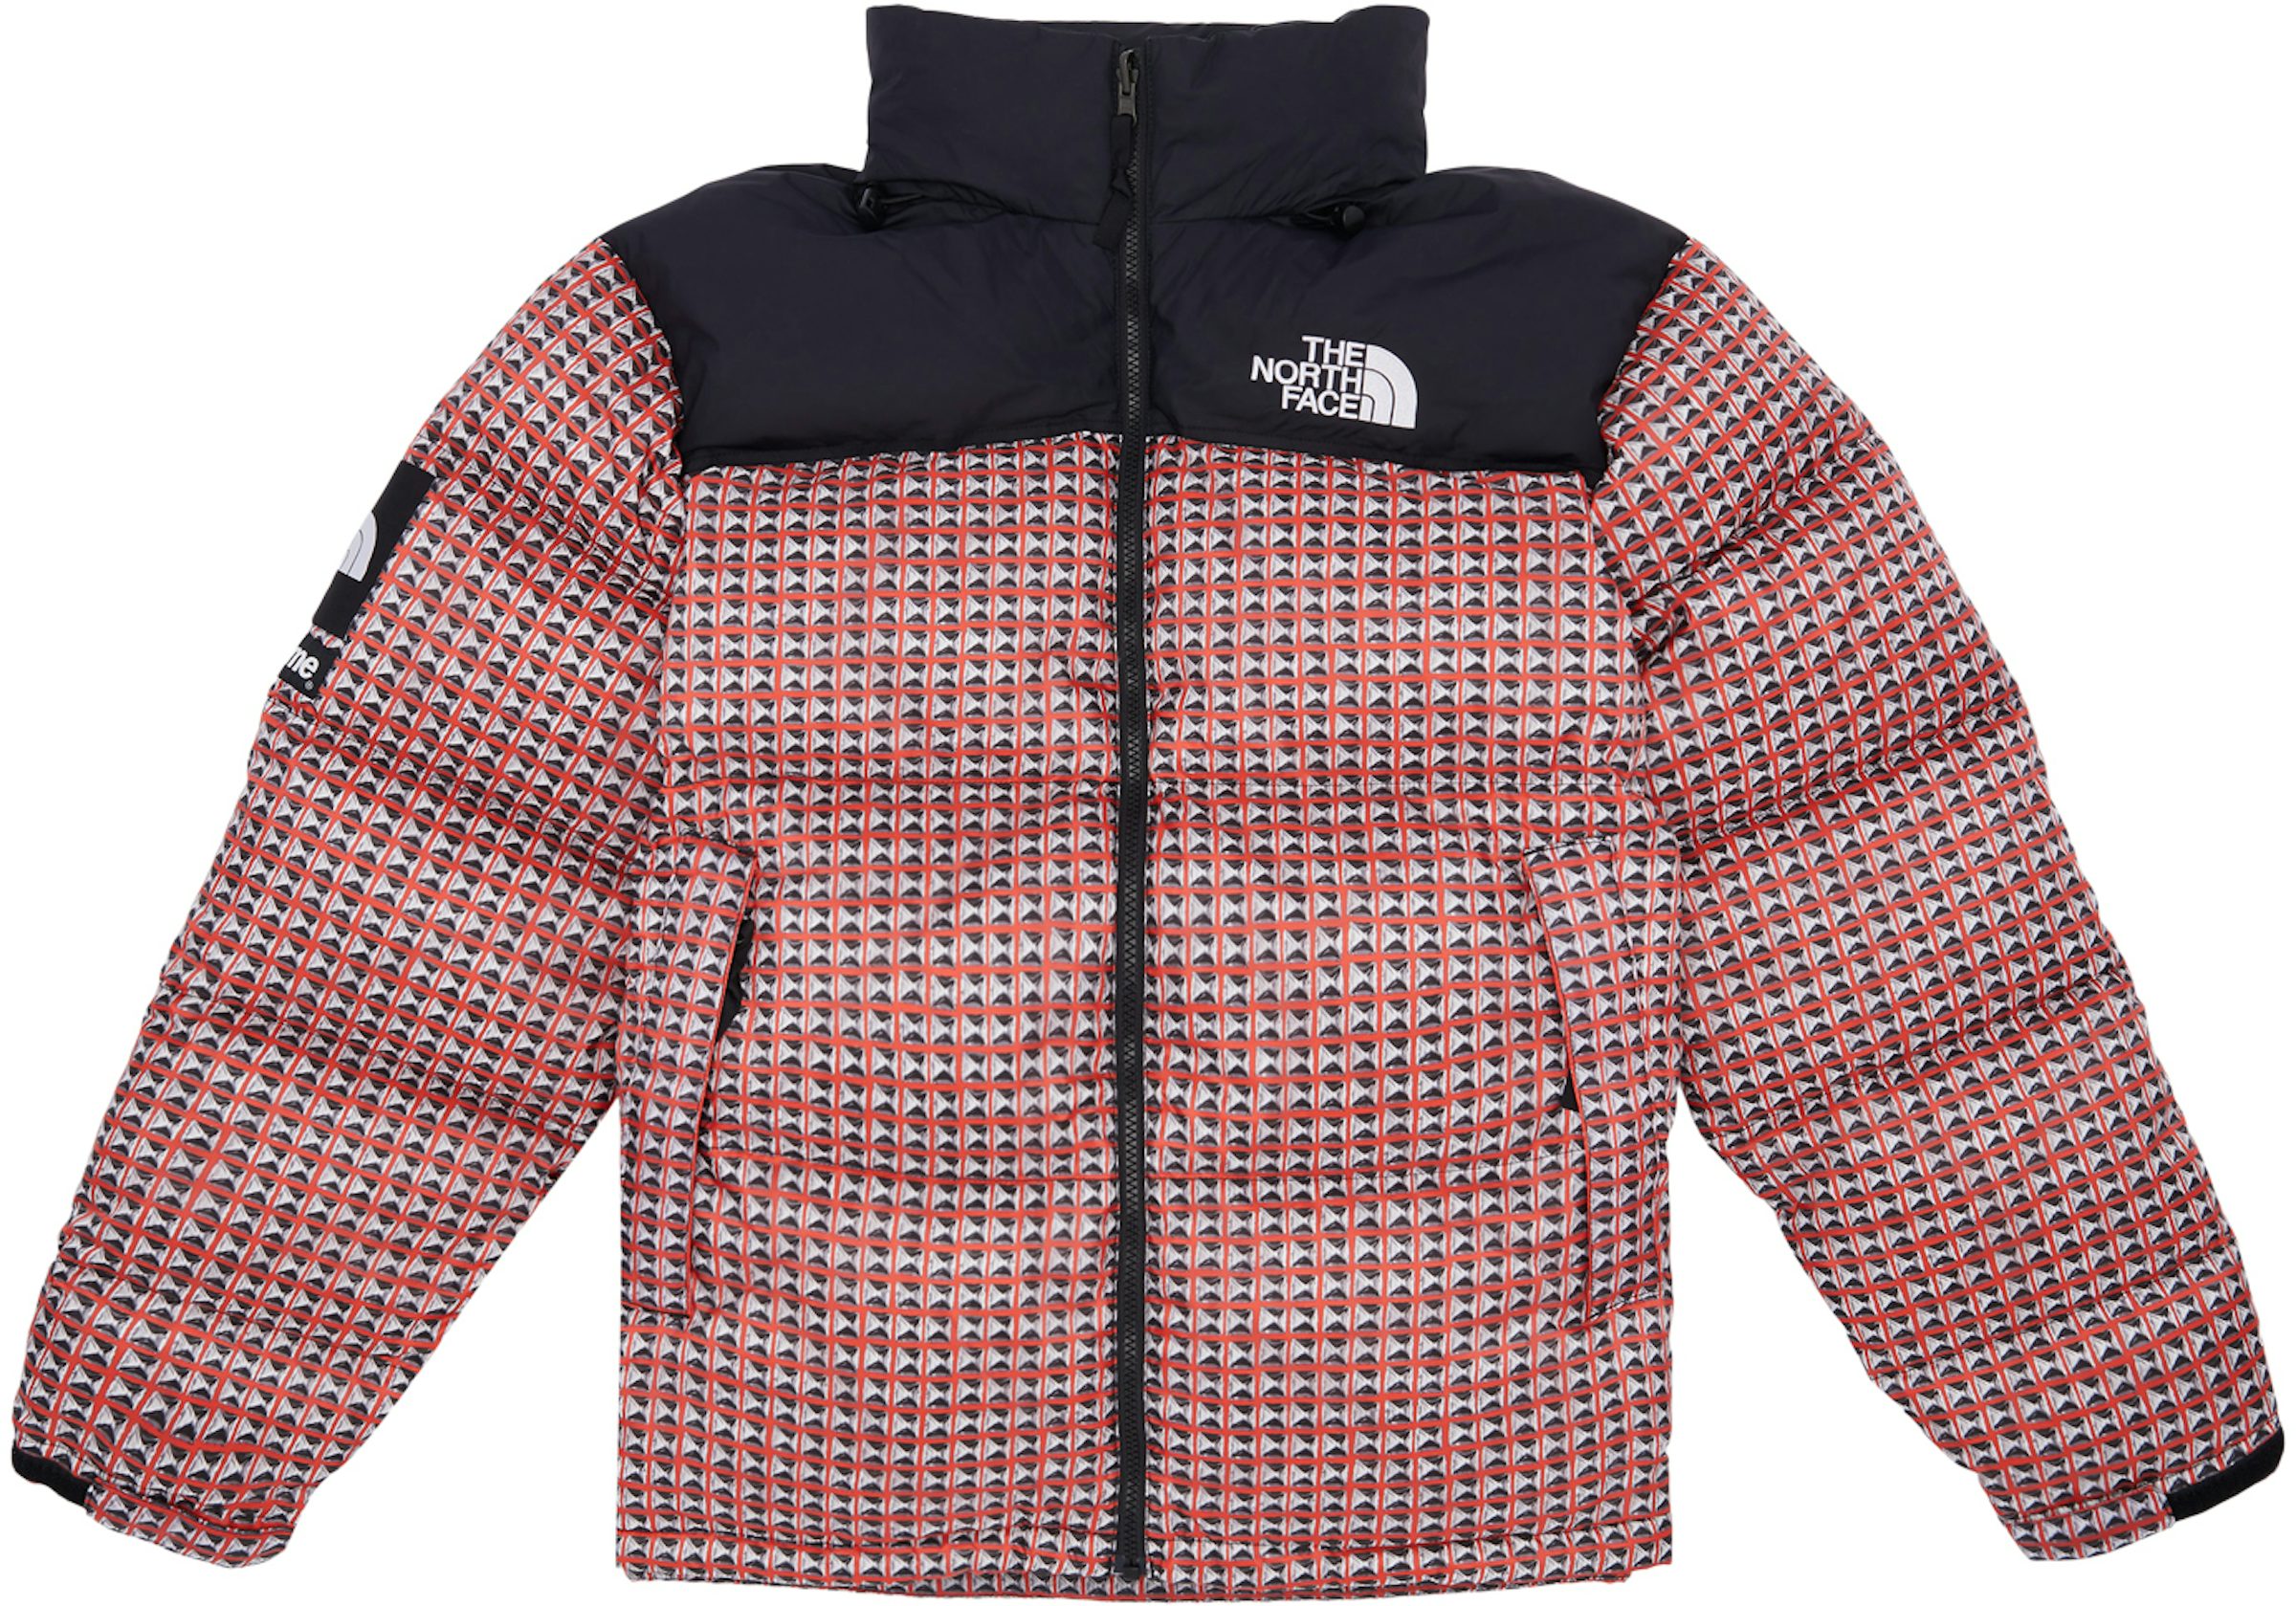 Chaise longue geroosterd brood Punt Supreme The North Face Studded Nuptse Jacket Red - SS21 Men's - US